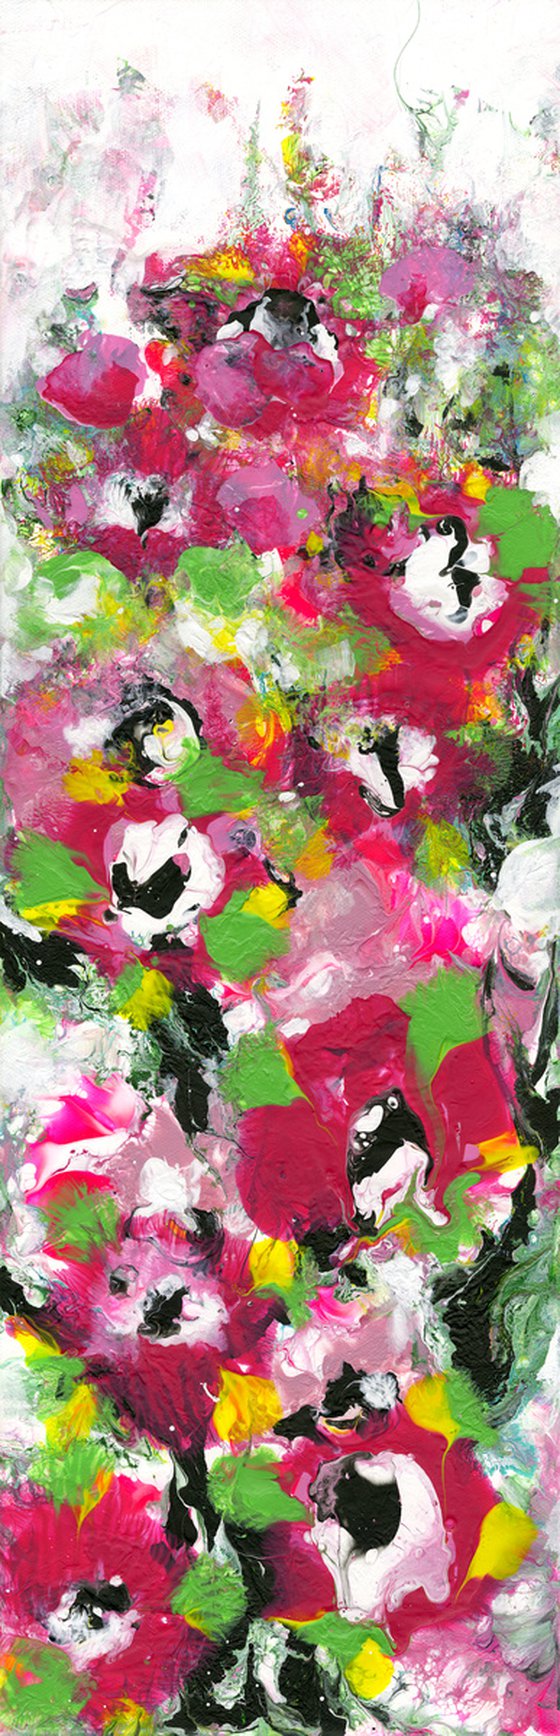 Enchanting Blooms 15 - Floral Painting by Kathy Morton Stanion